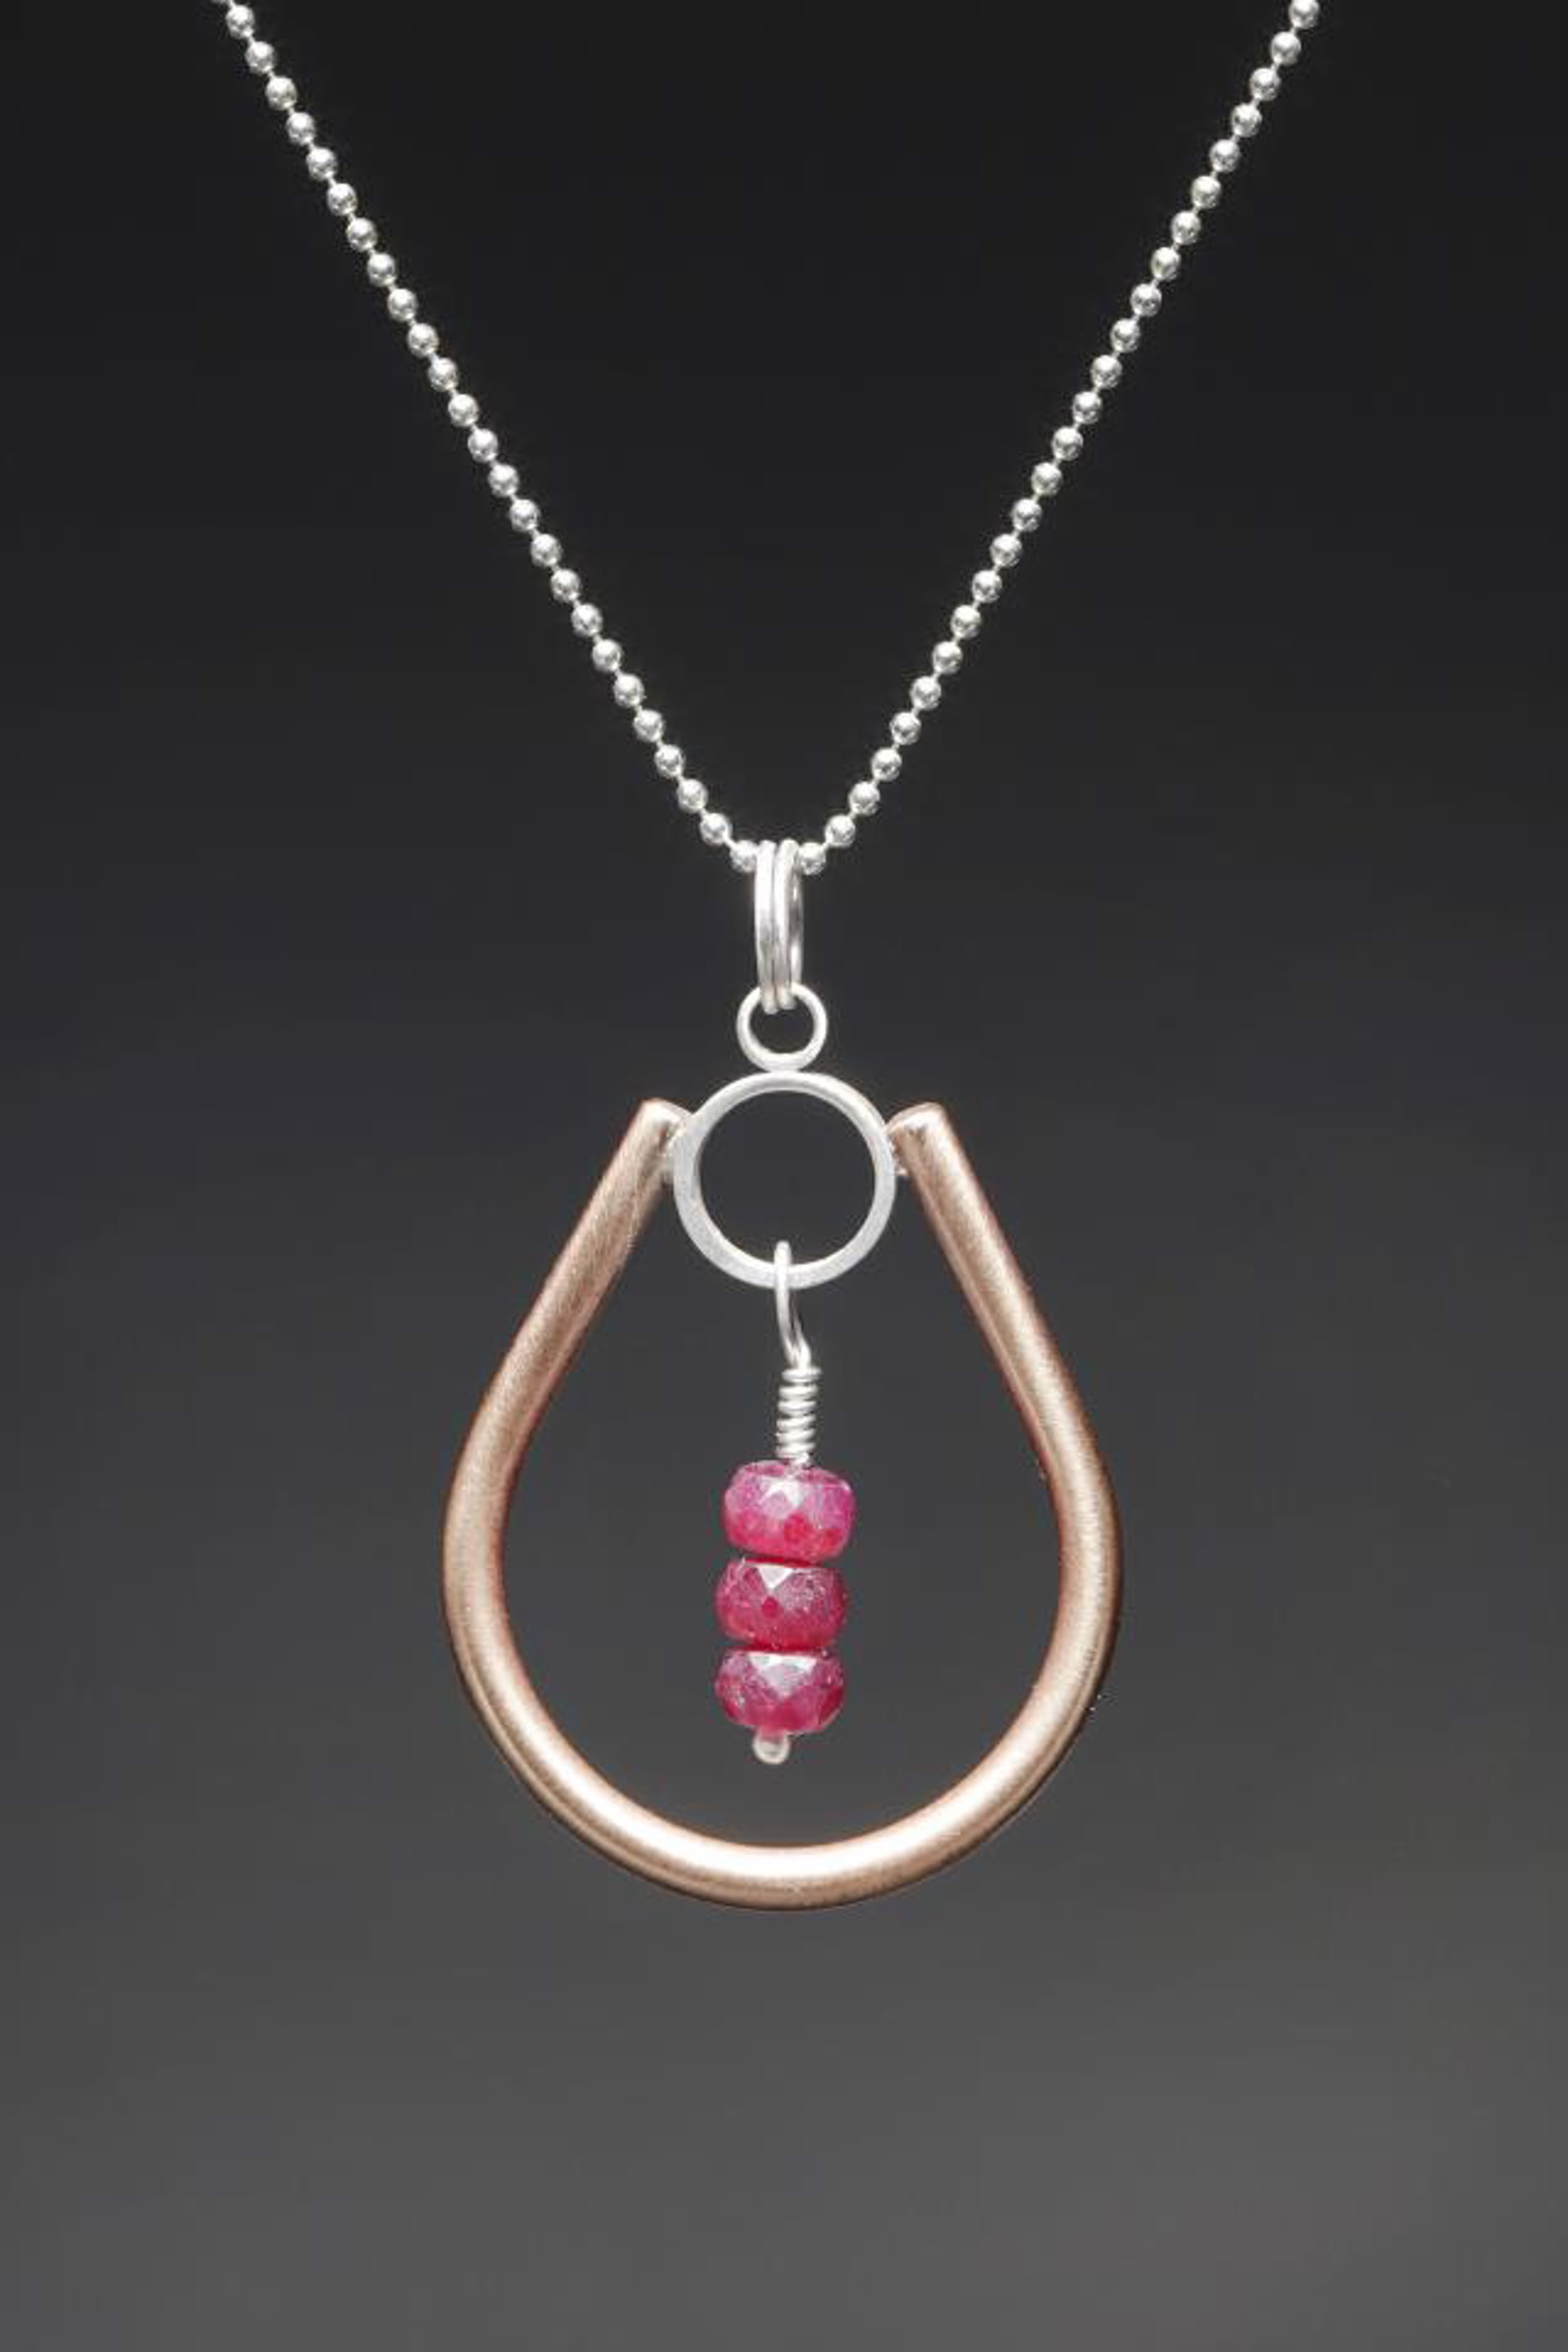 Ruby Bulb Necklace by Christie Calaycay